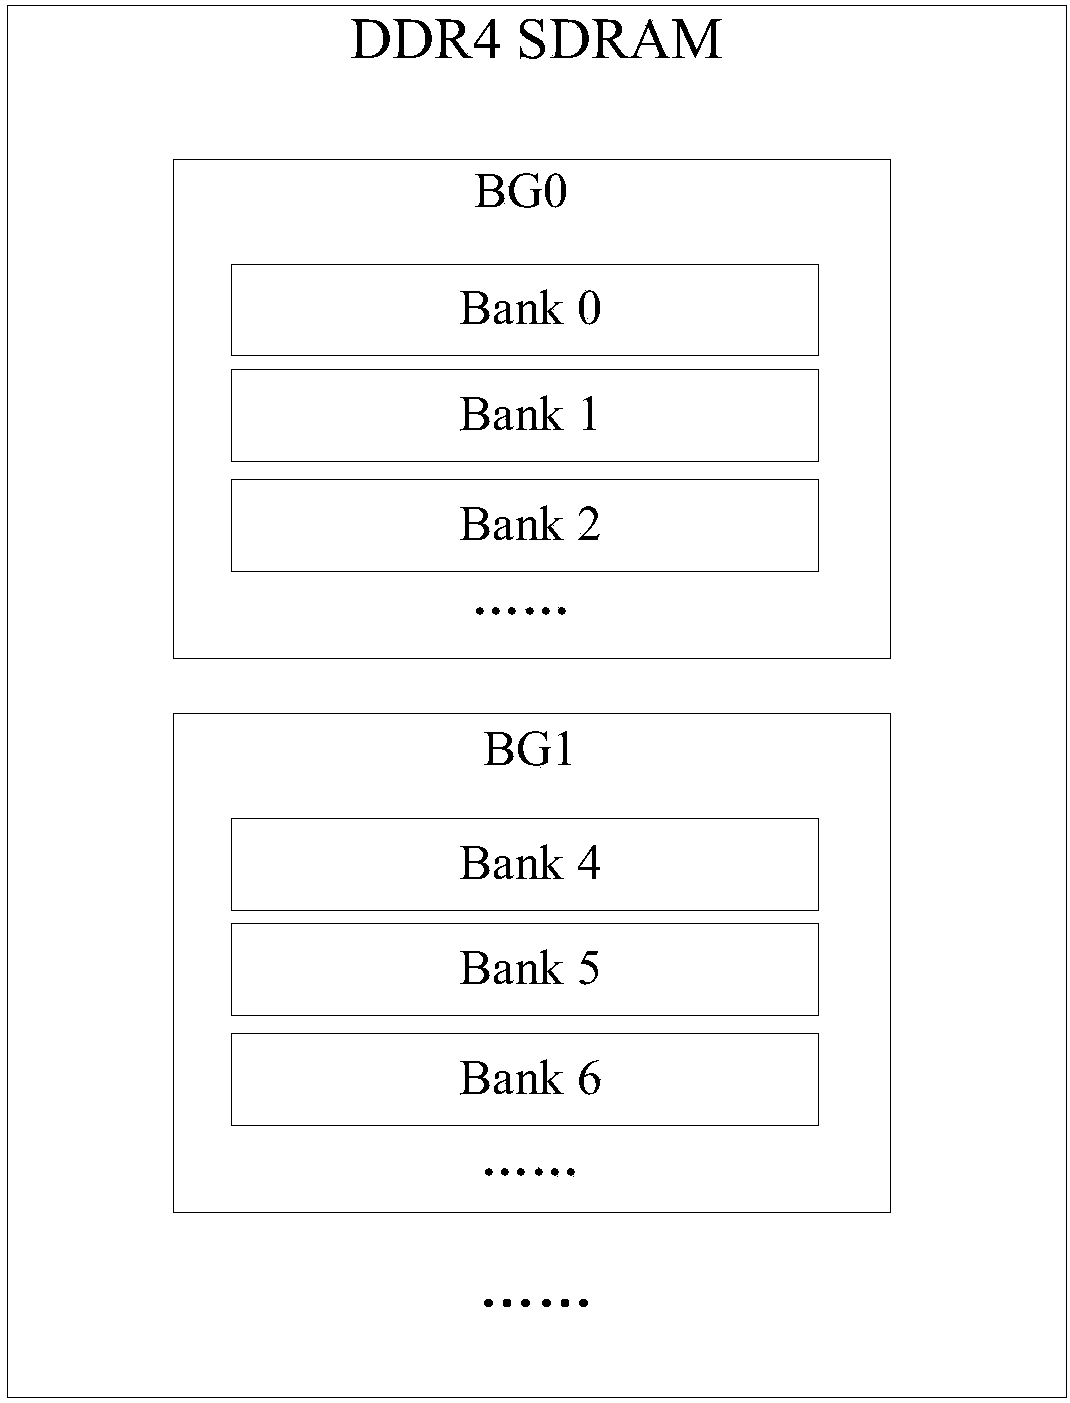 Memory access method and device